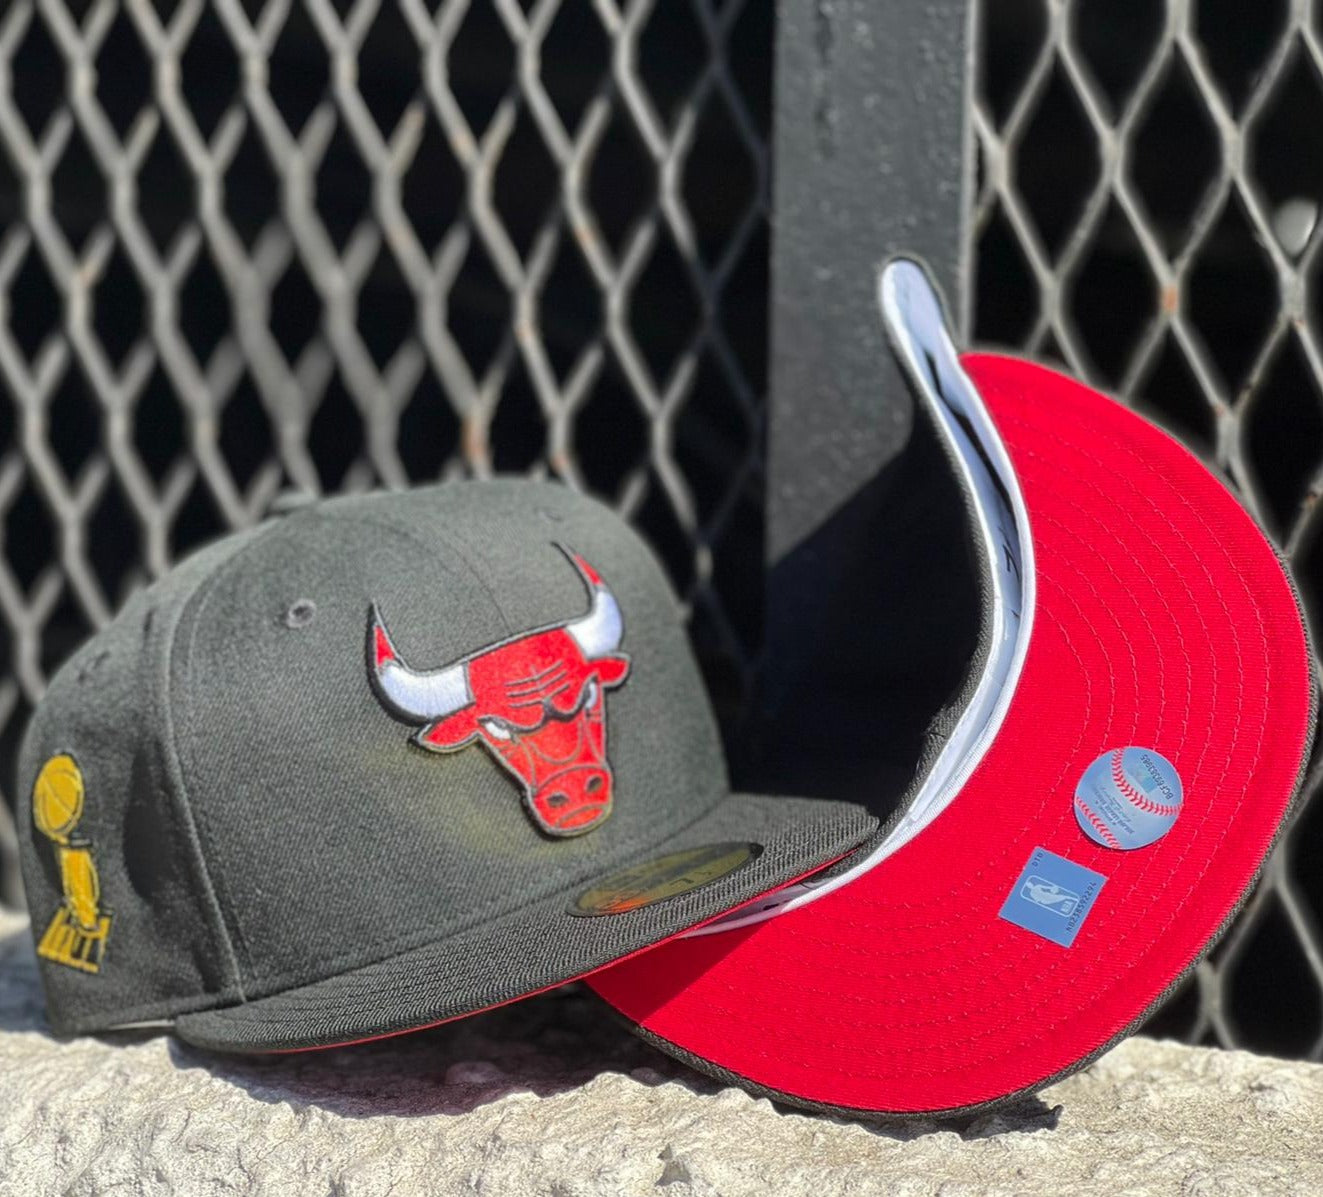 Chicago Bulls City Edition 59FIFTY Fitted Hat